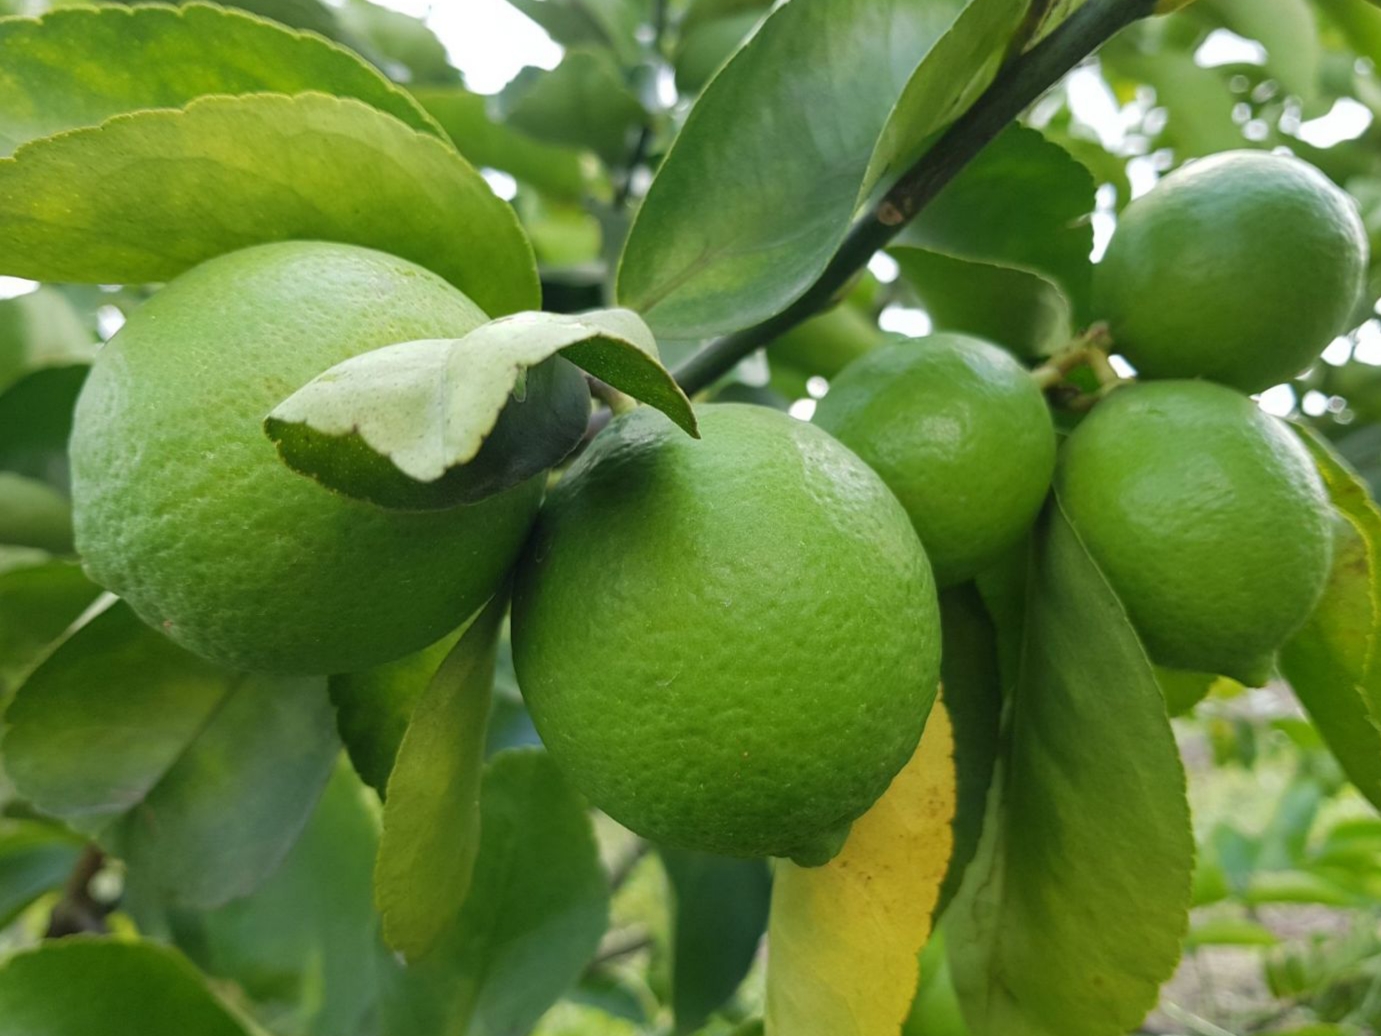 The lemon tree brought a rather high economic value over the past time